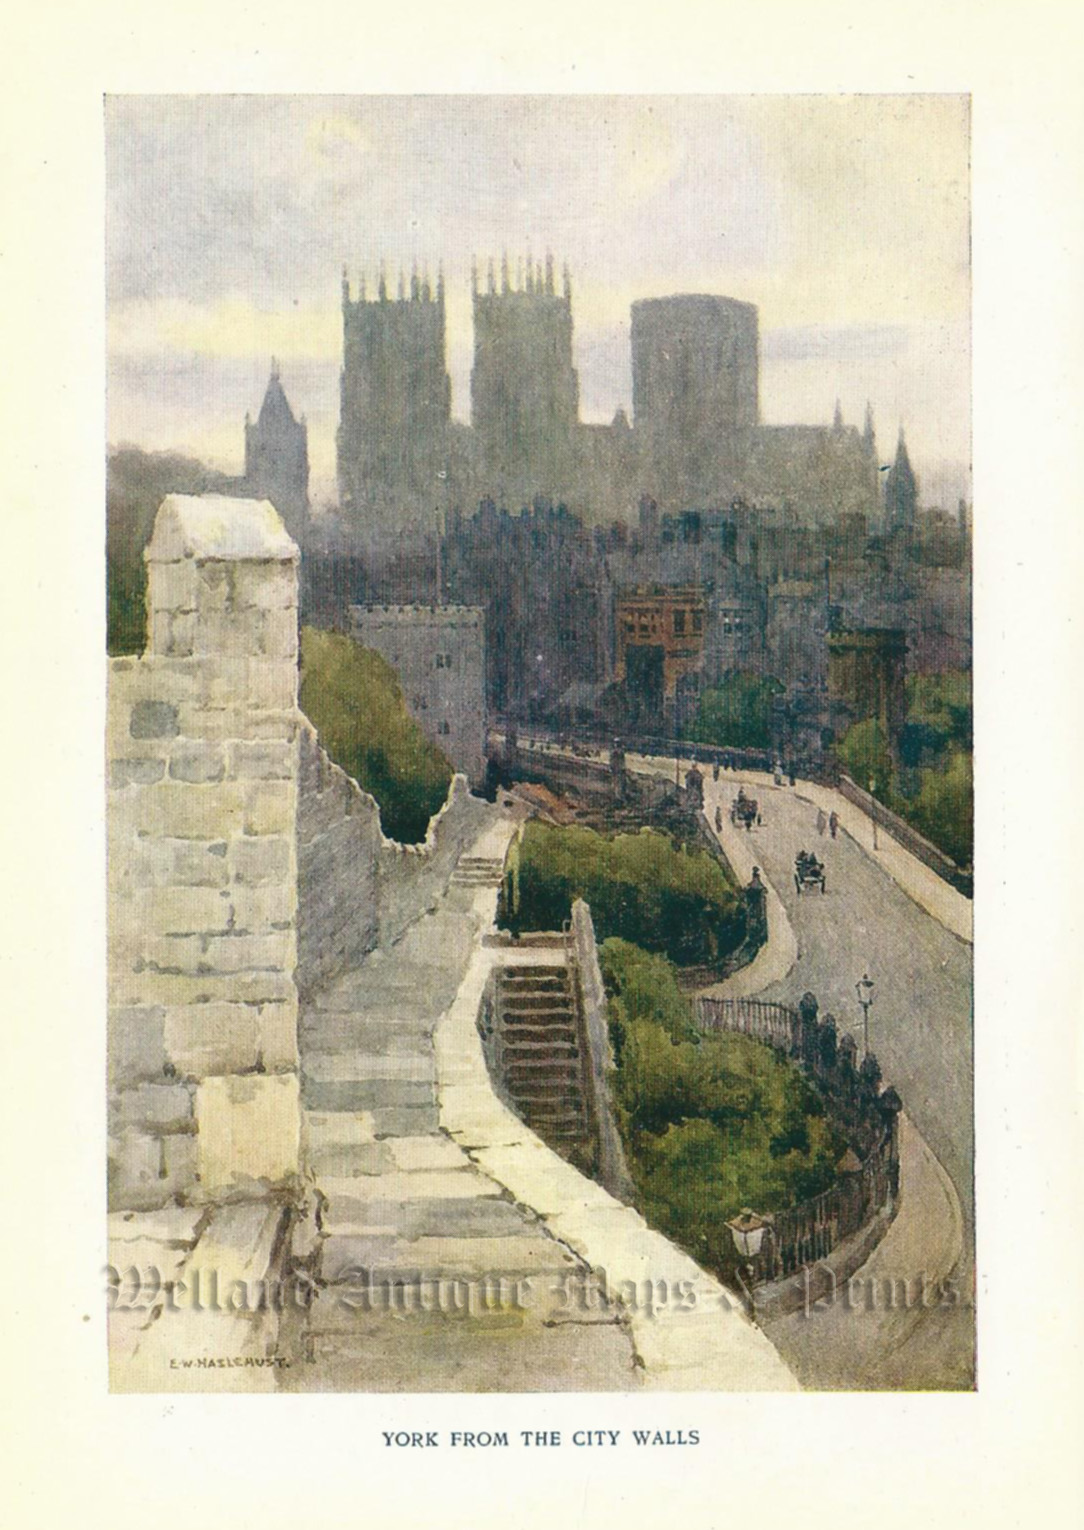 ‘YORK FROM THE CITY WALLS’ by E. W. Haslehust R.B.A. 1910 /1940 ...